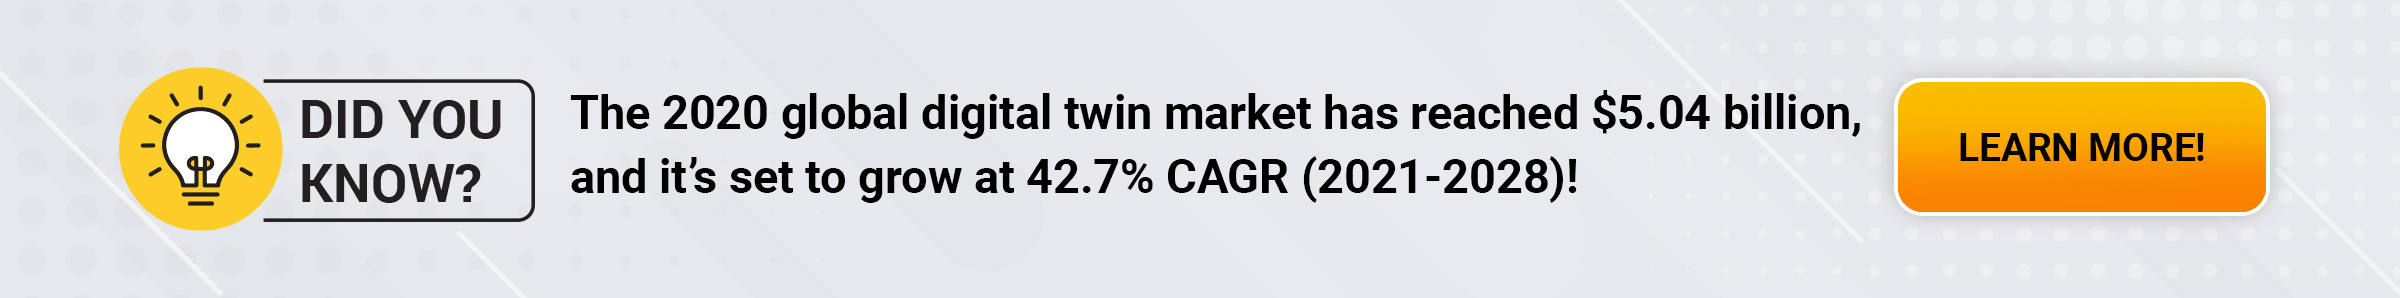 The 2020 global digital twin market has reached $5.04 billion, and it’s set to grow at 42.7% CAGR (2021-2028).